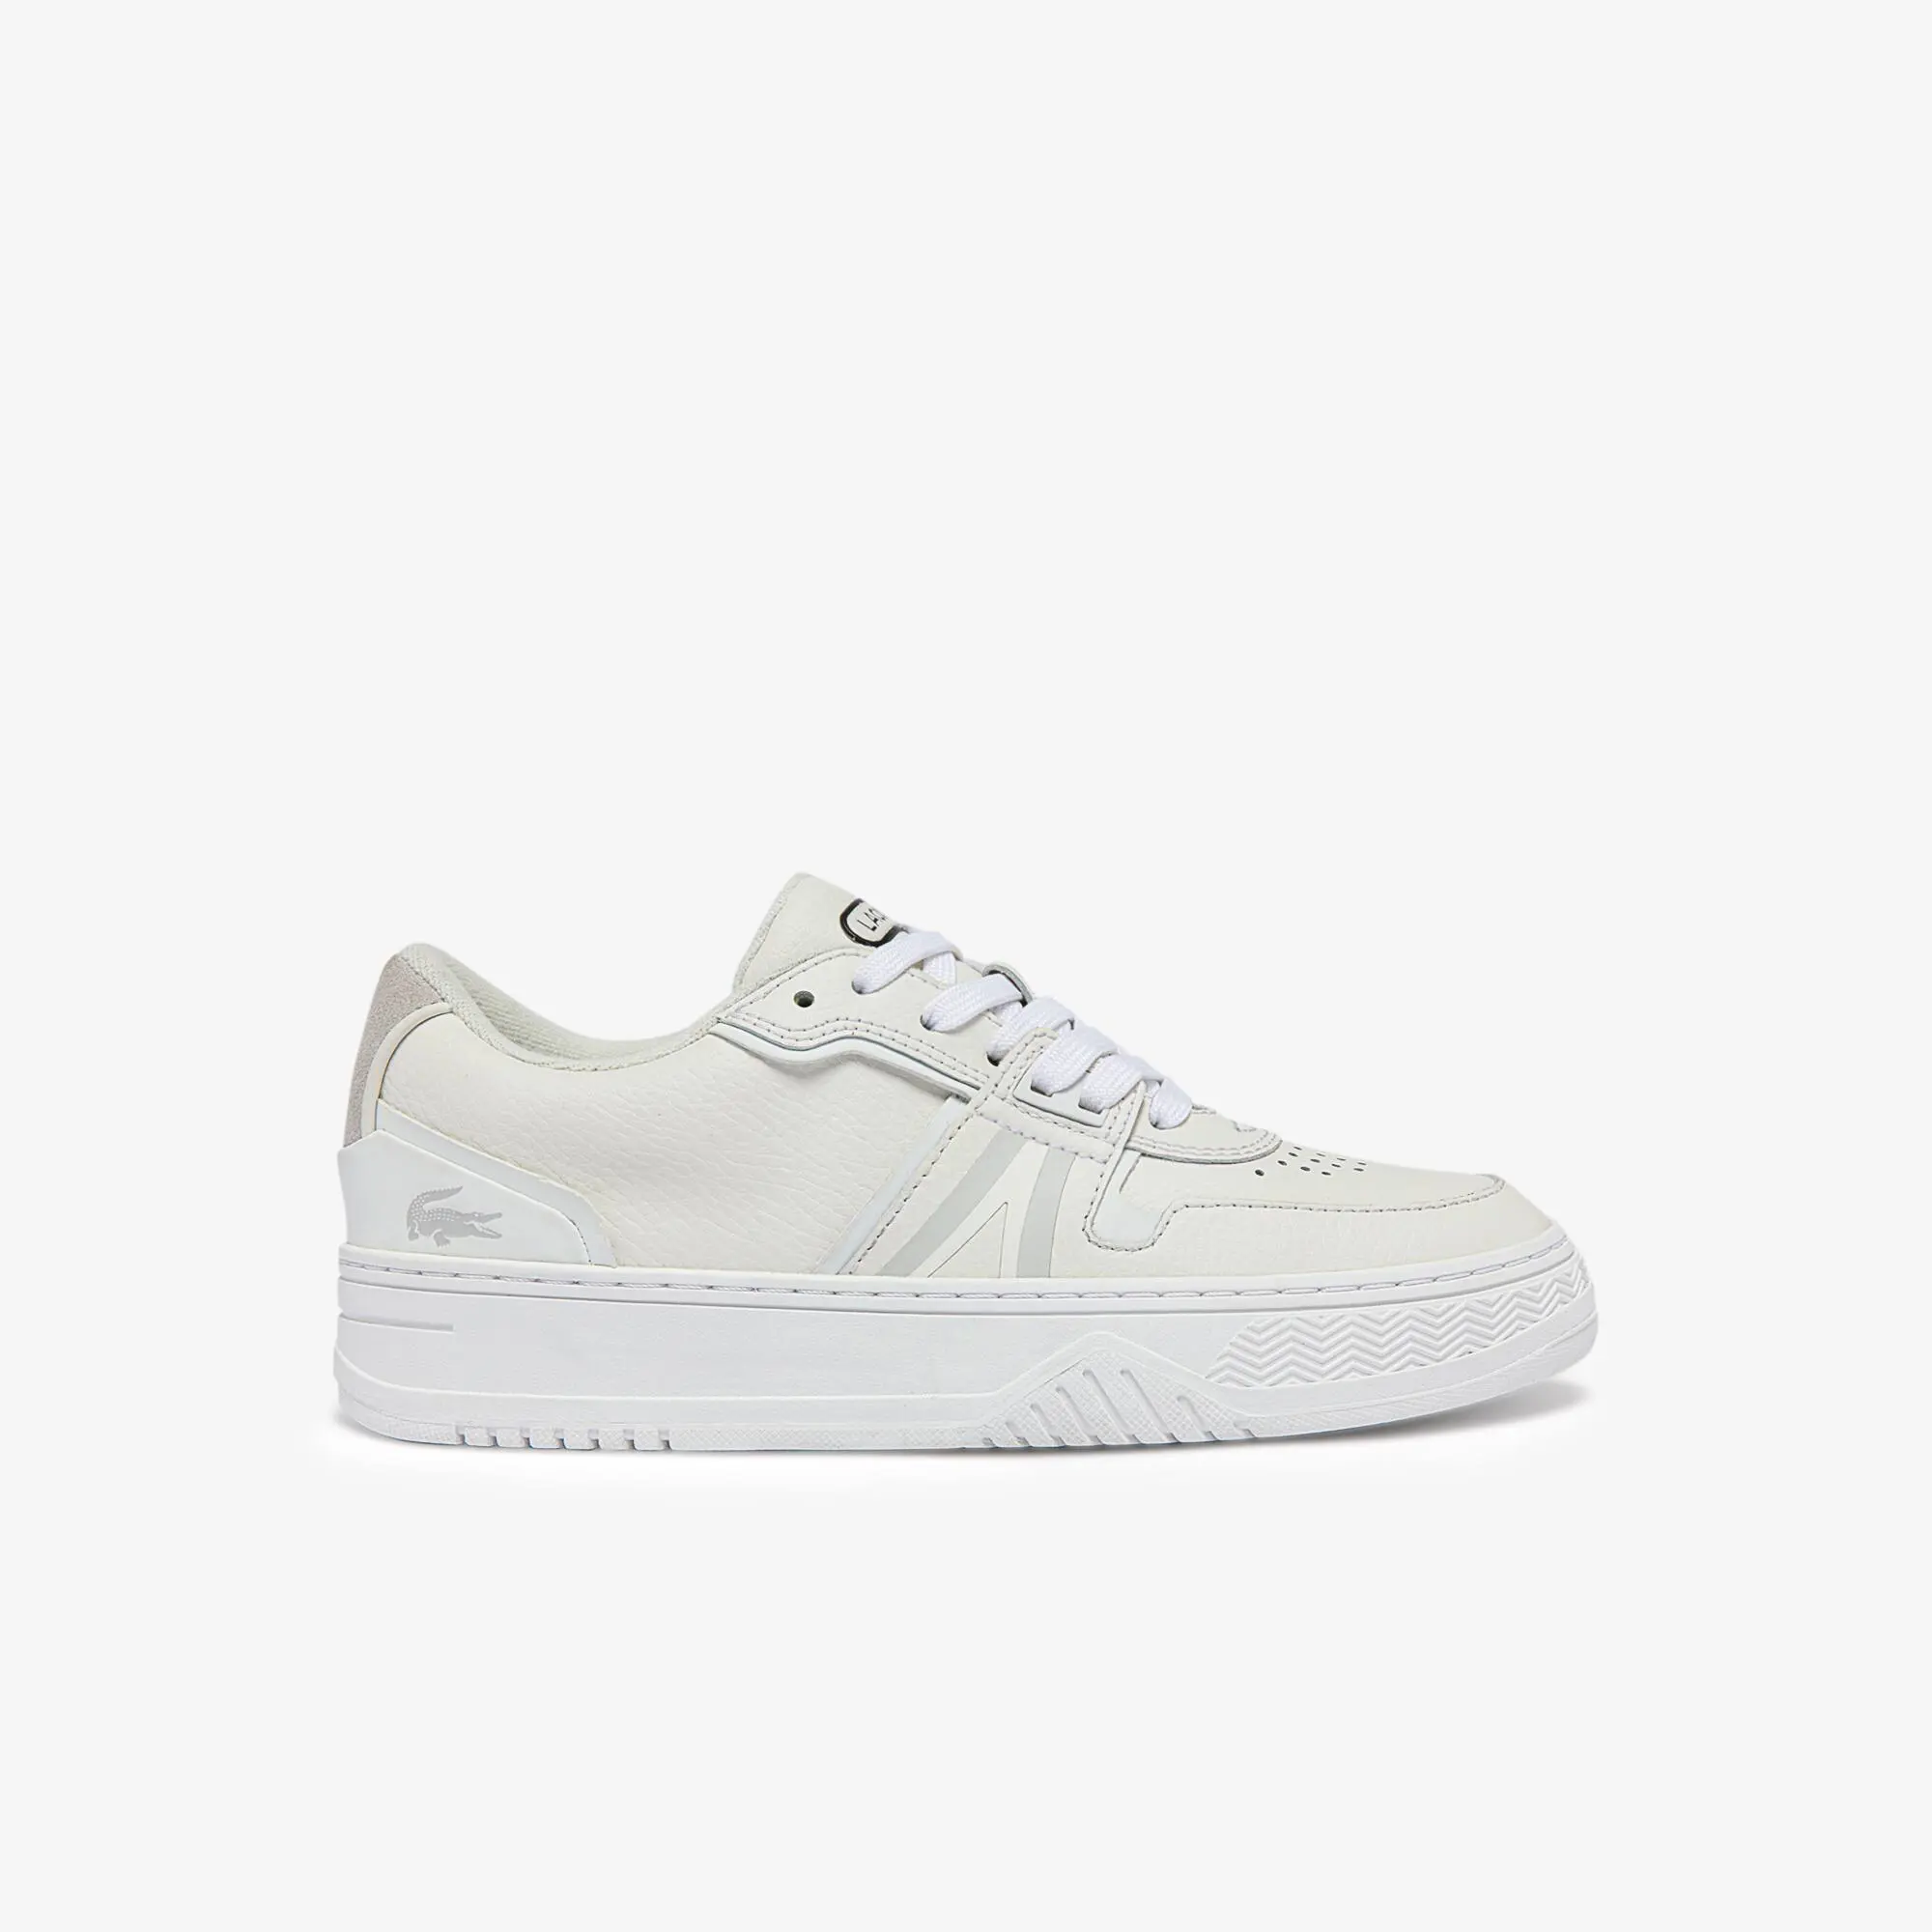 Lacoste Women's L001 Leather Trainers. 1